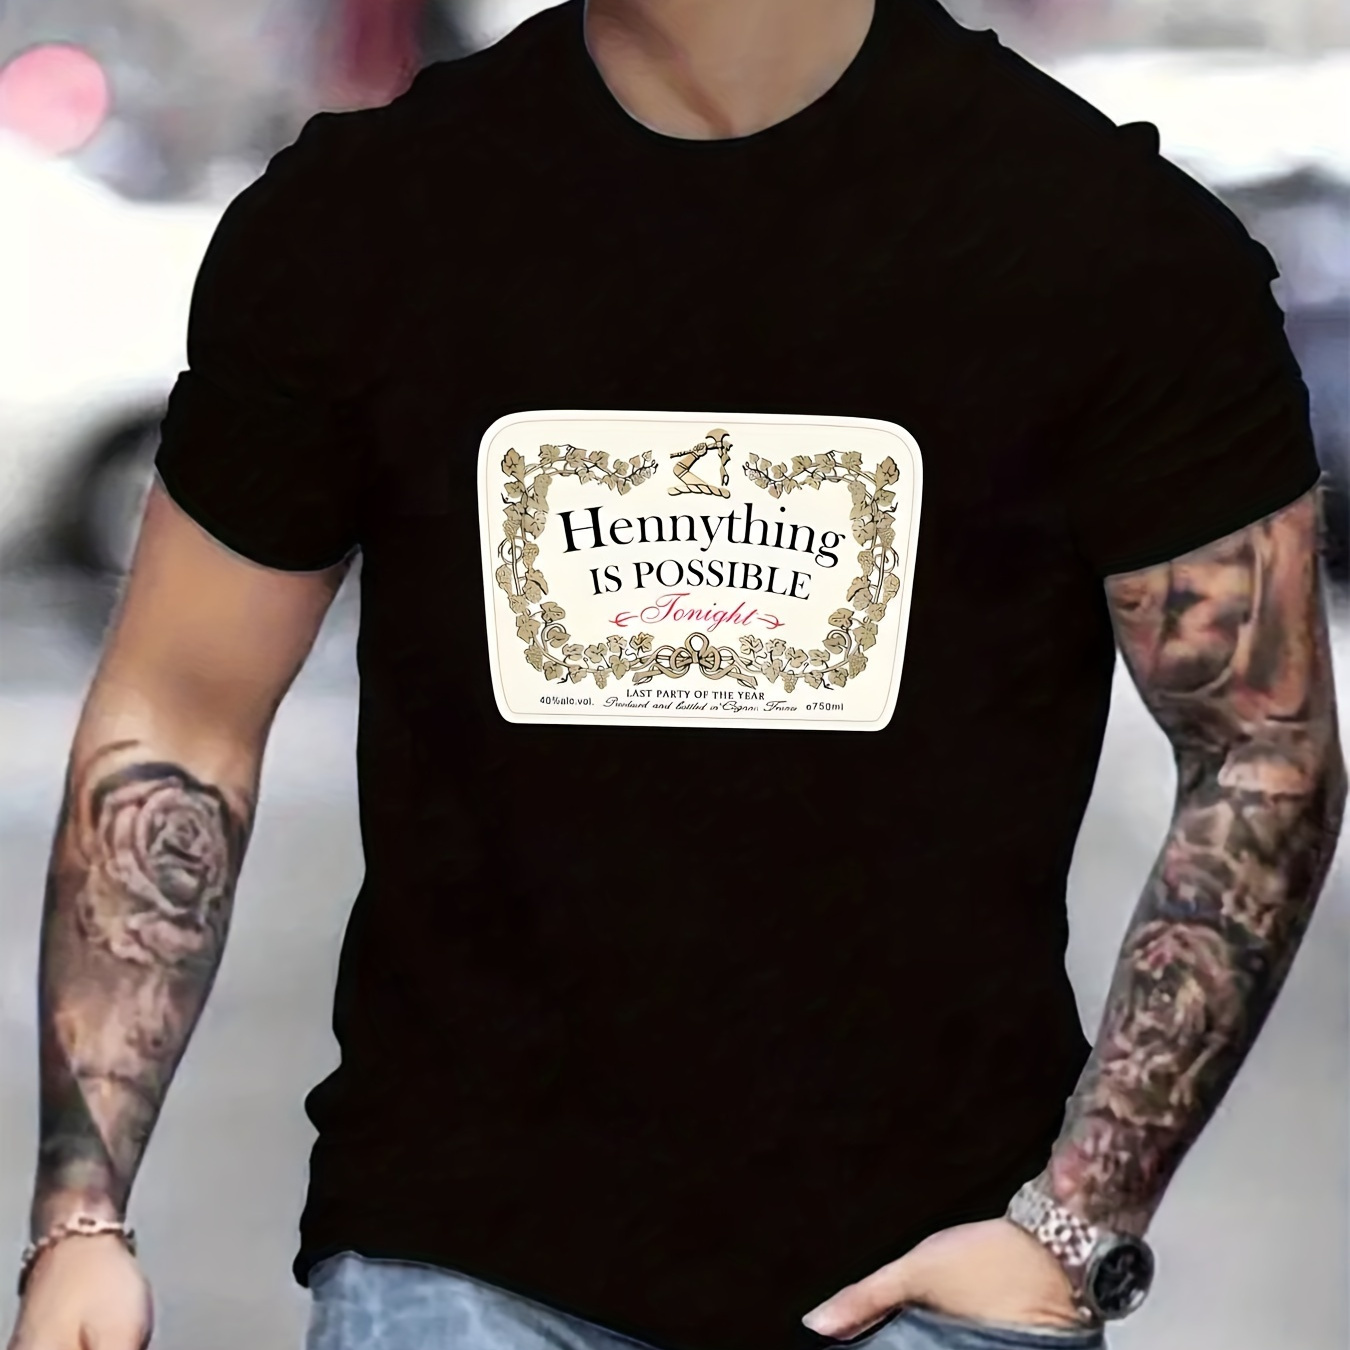 

Hennything Is Possible Print, Men's Novel Graphic Design T-shirt, Casual Comfy Tees For Summer, Men's Clothing Tops For Daily Activities